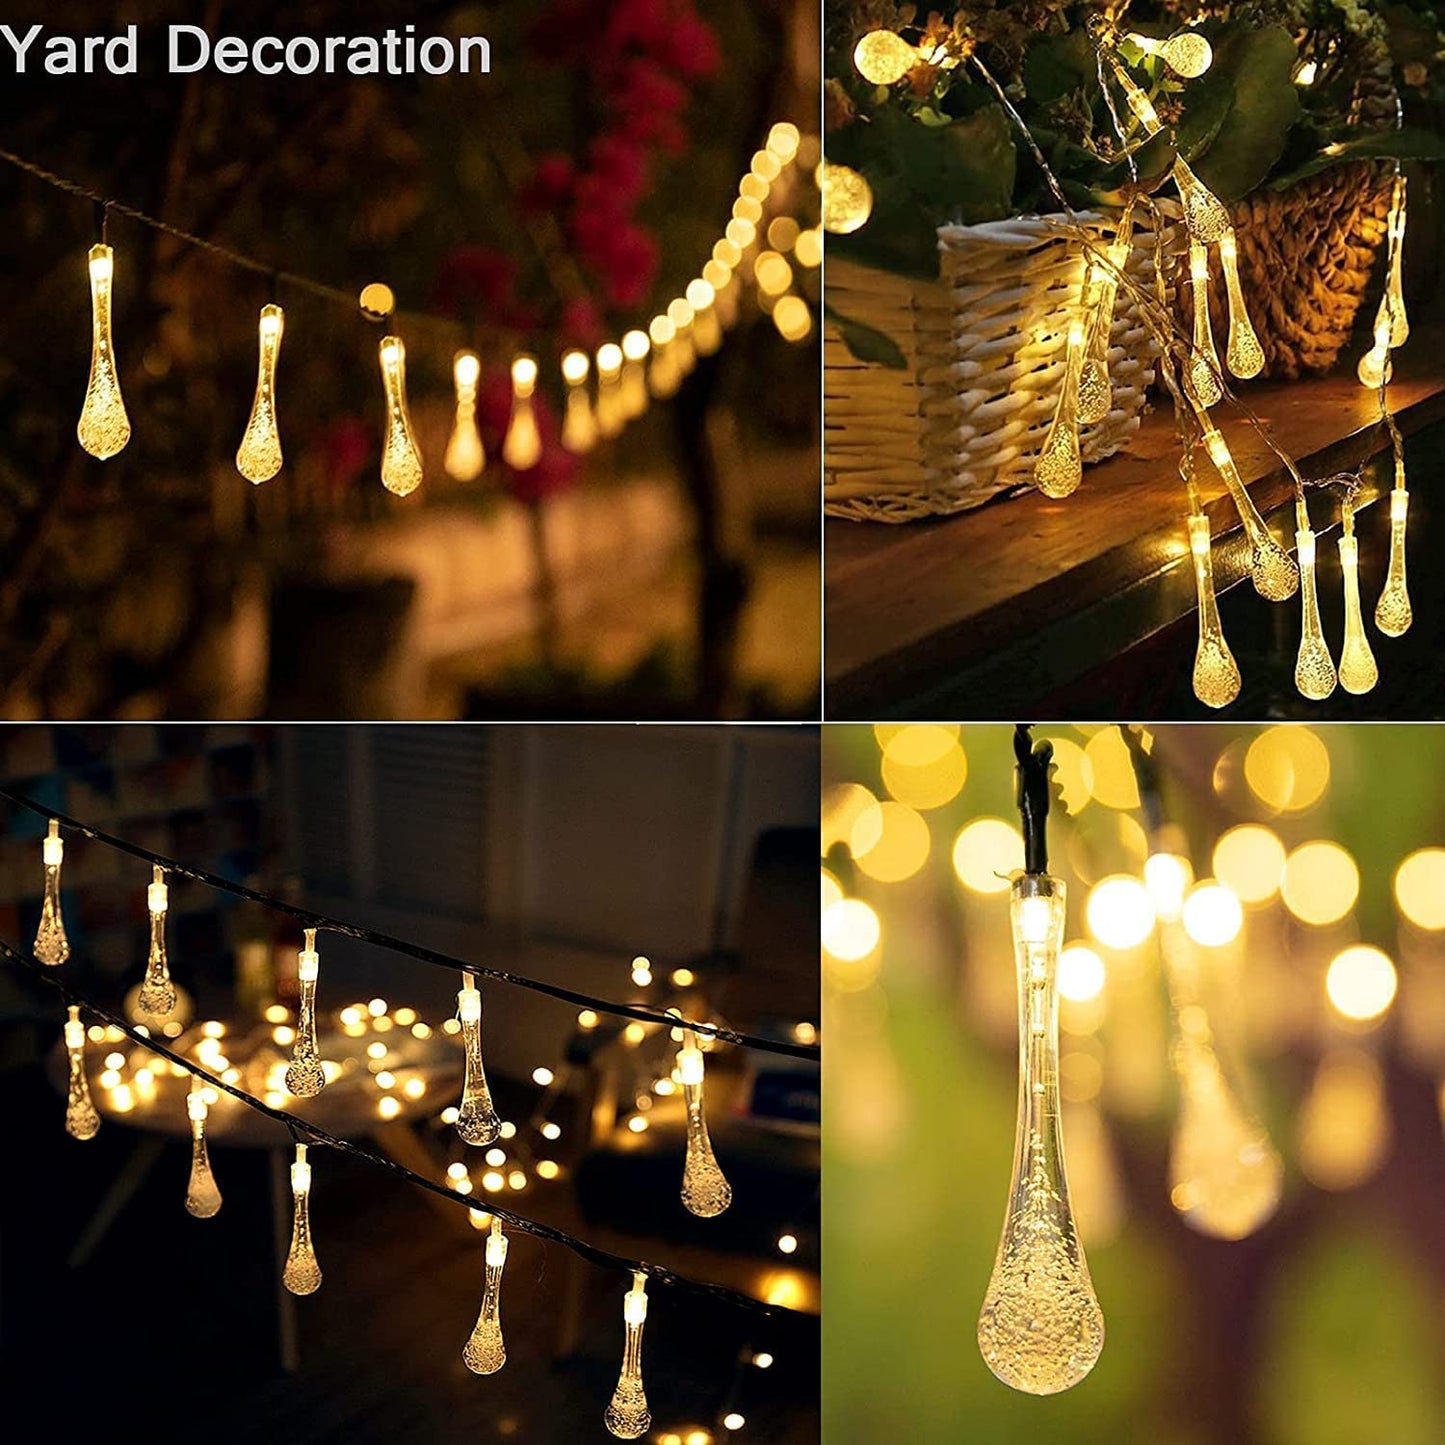 A mesmerizing string of illuminated glass drops, radiating a soft glow, creating an enchanting ambiance.